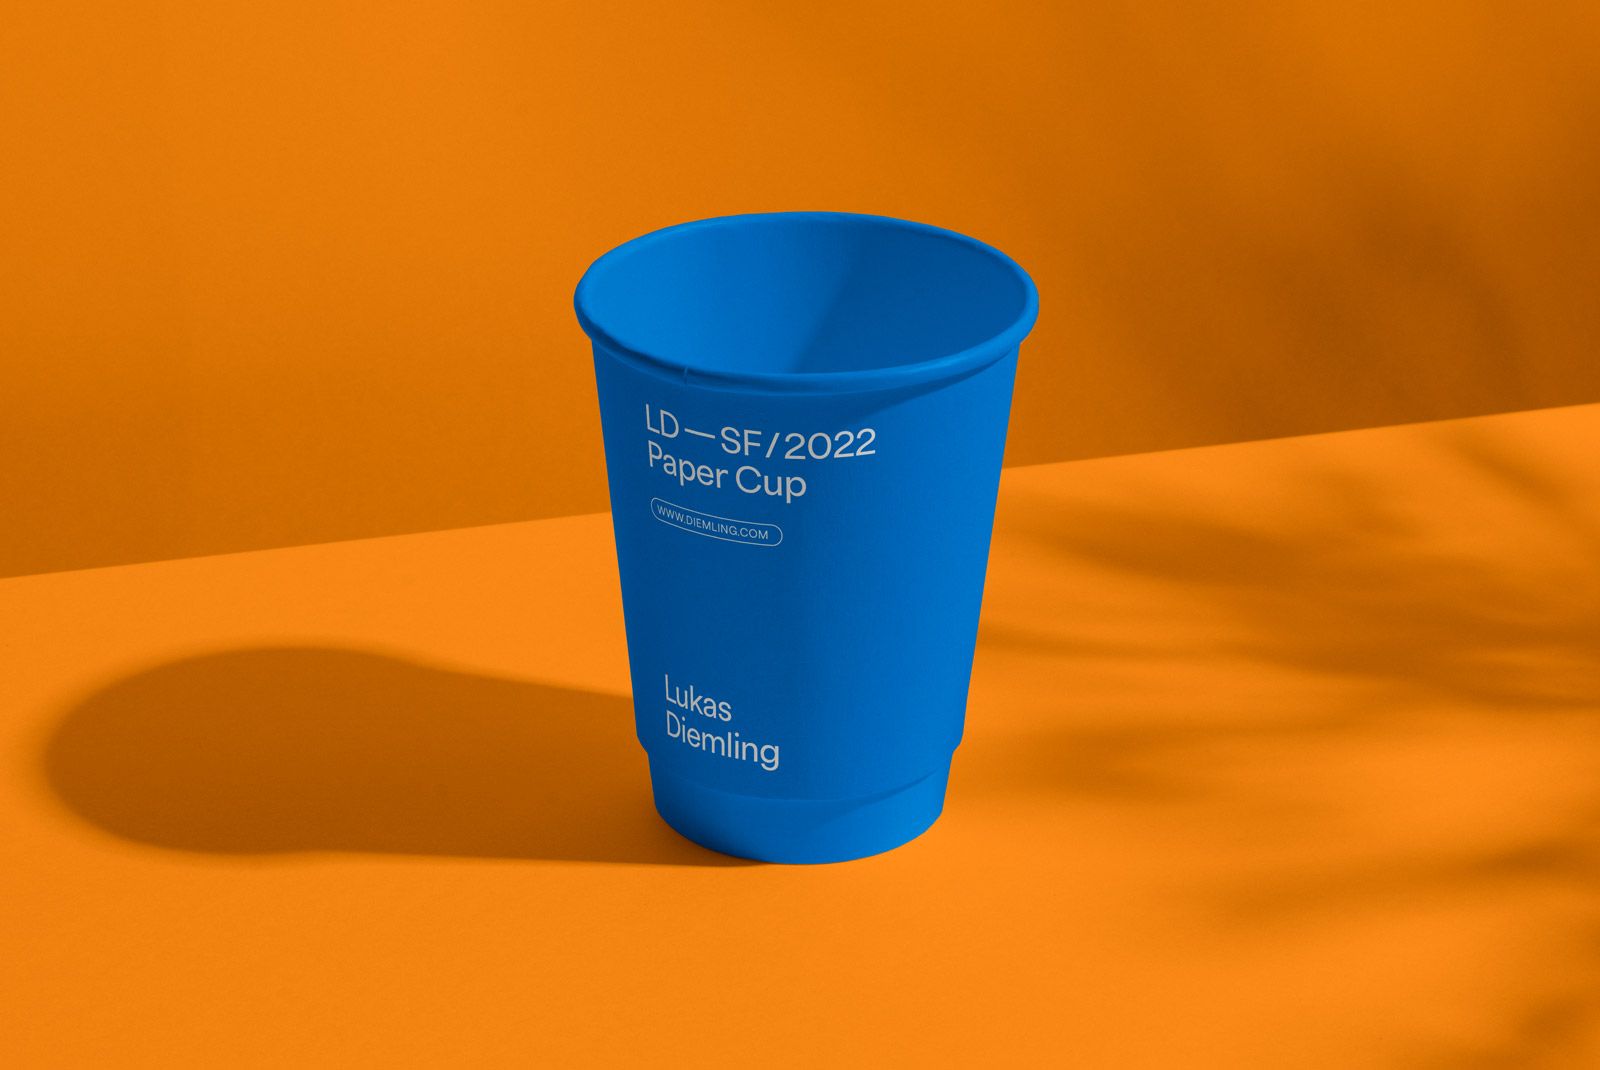 https://supply.family/wp-content/uploads/2022/07/02_Paper-Cup-01-Mockup-Lukas-Diemling.jpg